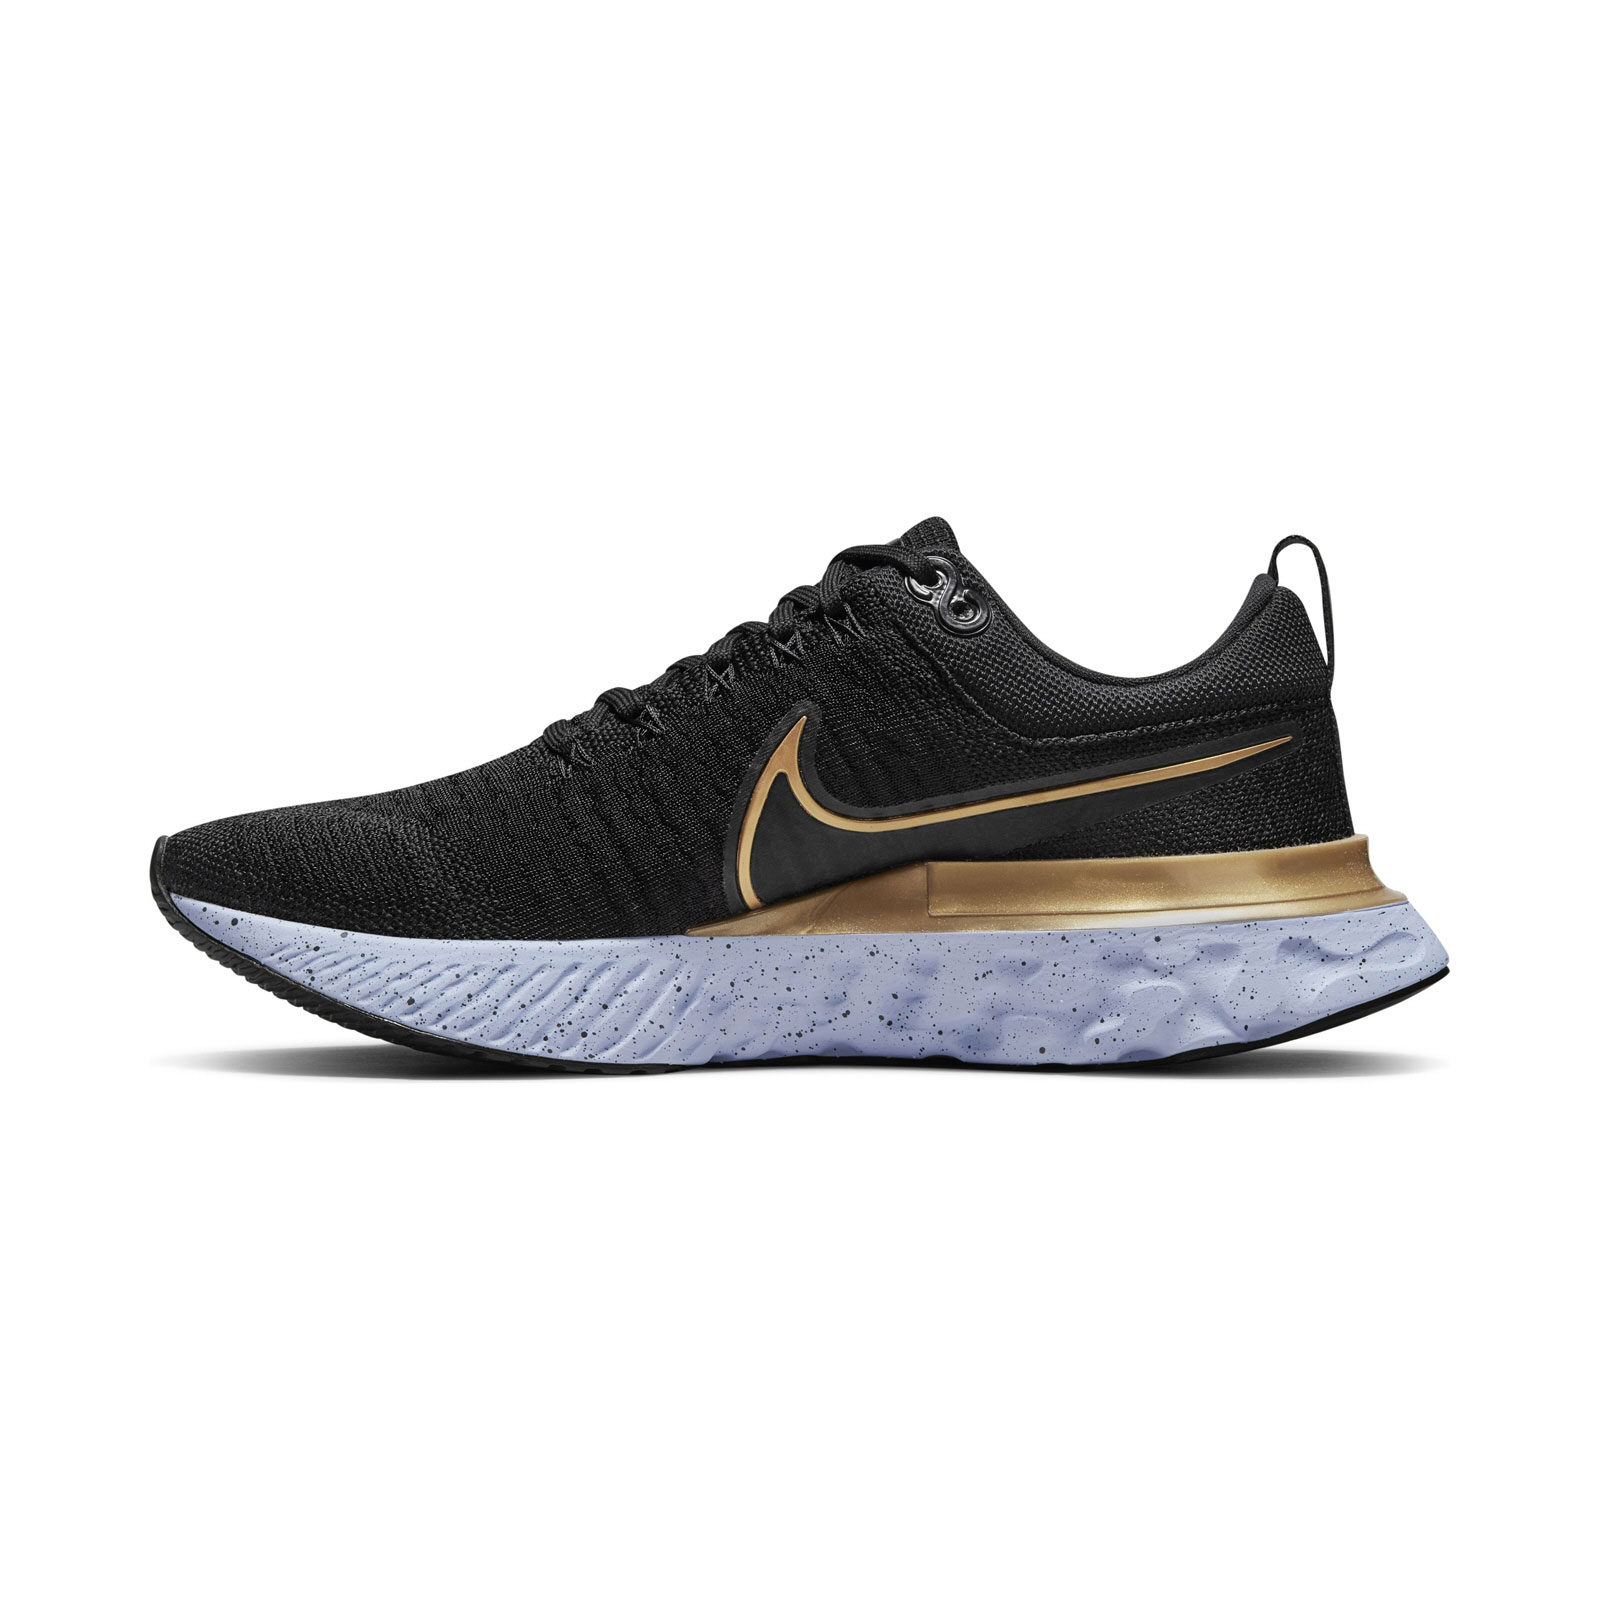 NIKE REACT INFINITY FLYNIT2 WOMENS SHOES BLACK/GOLD